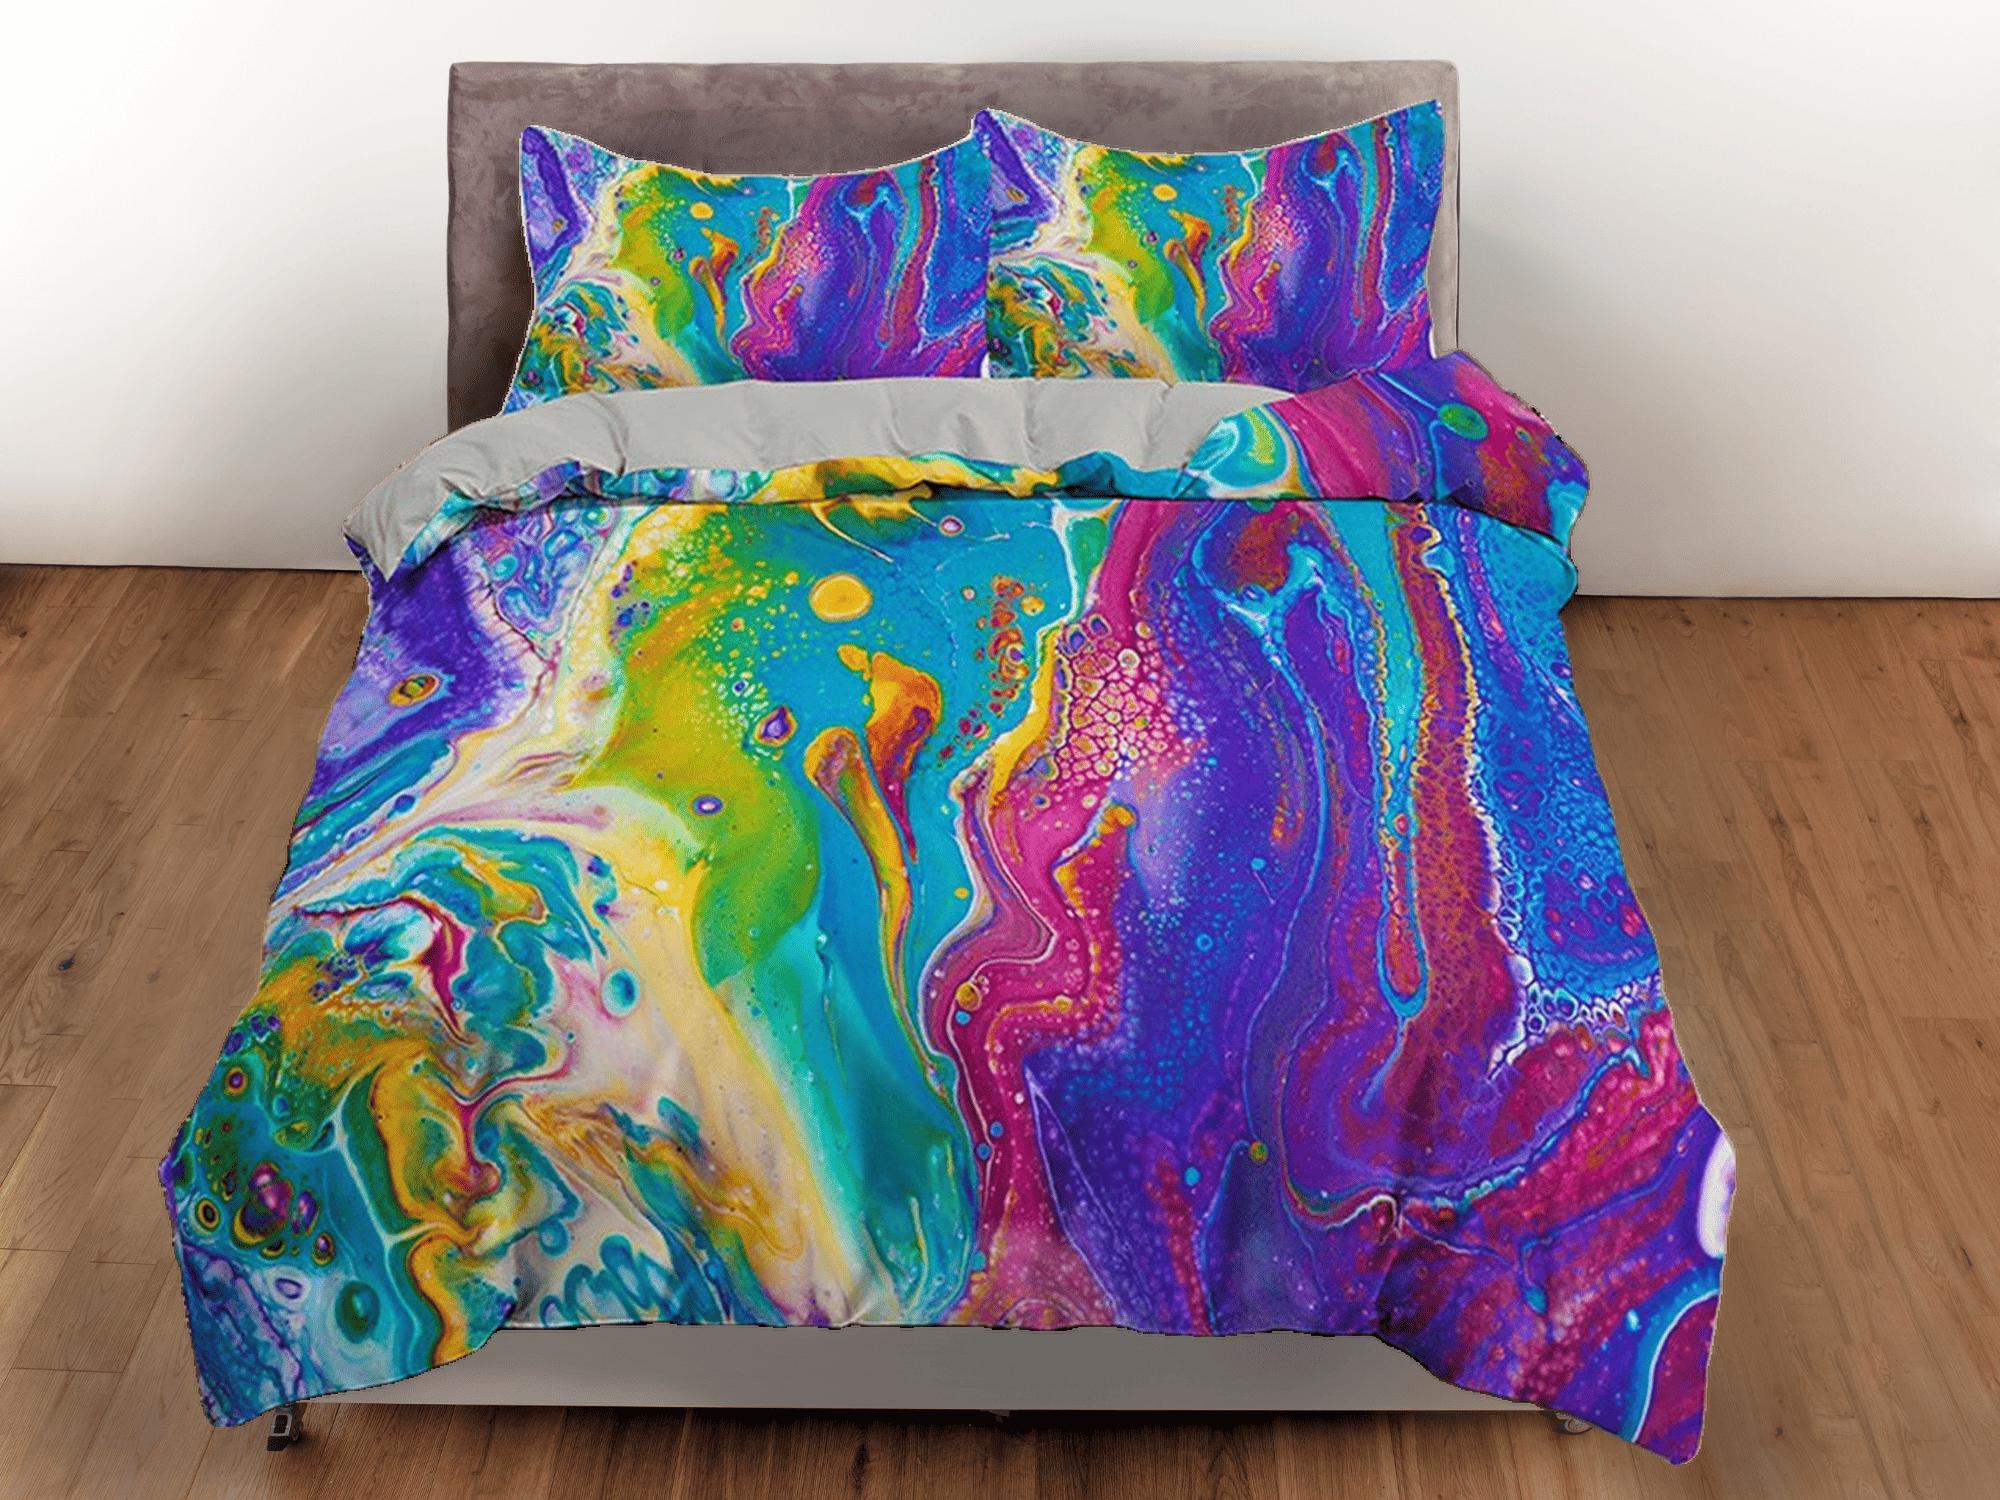 daintyduvet Contemporary bedroom set colorful painted aesthetic duvet cover, alcohol ink abstract art room decor boho chic bedding set full king queen